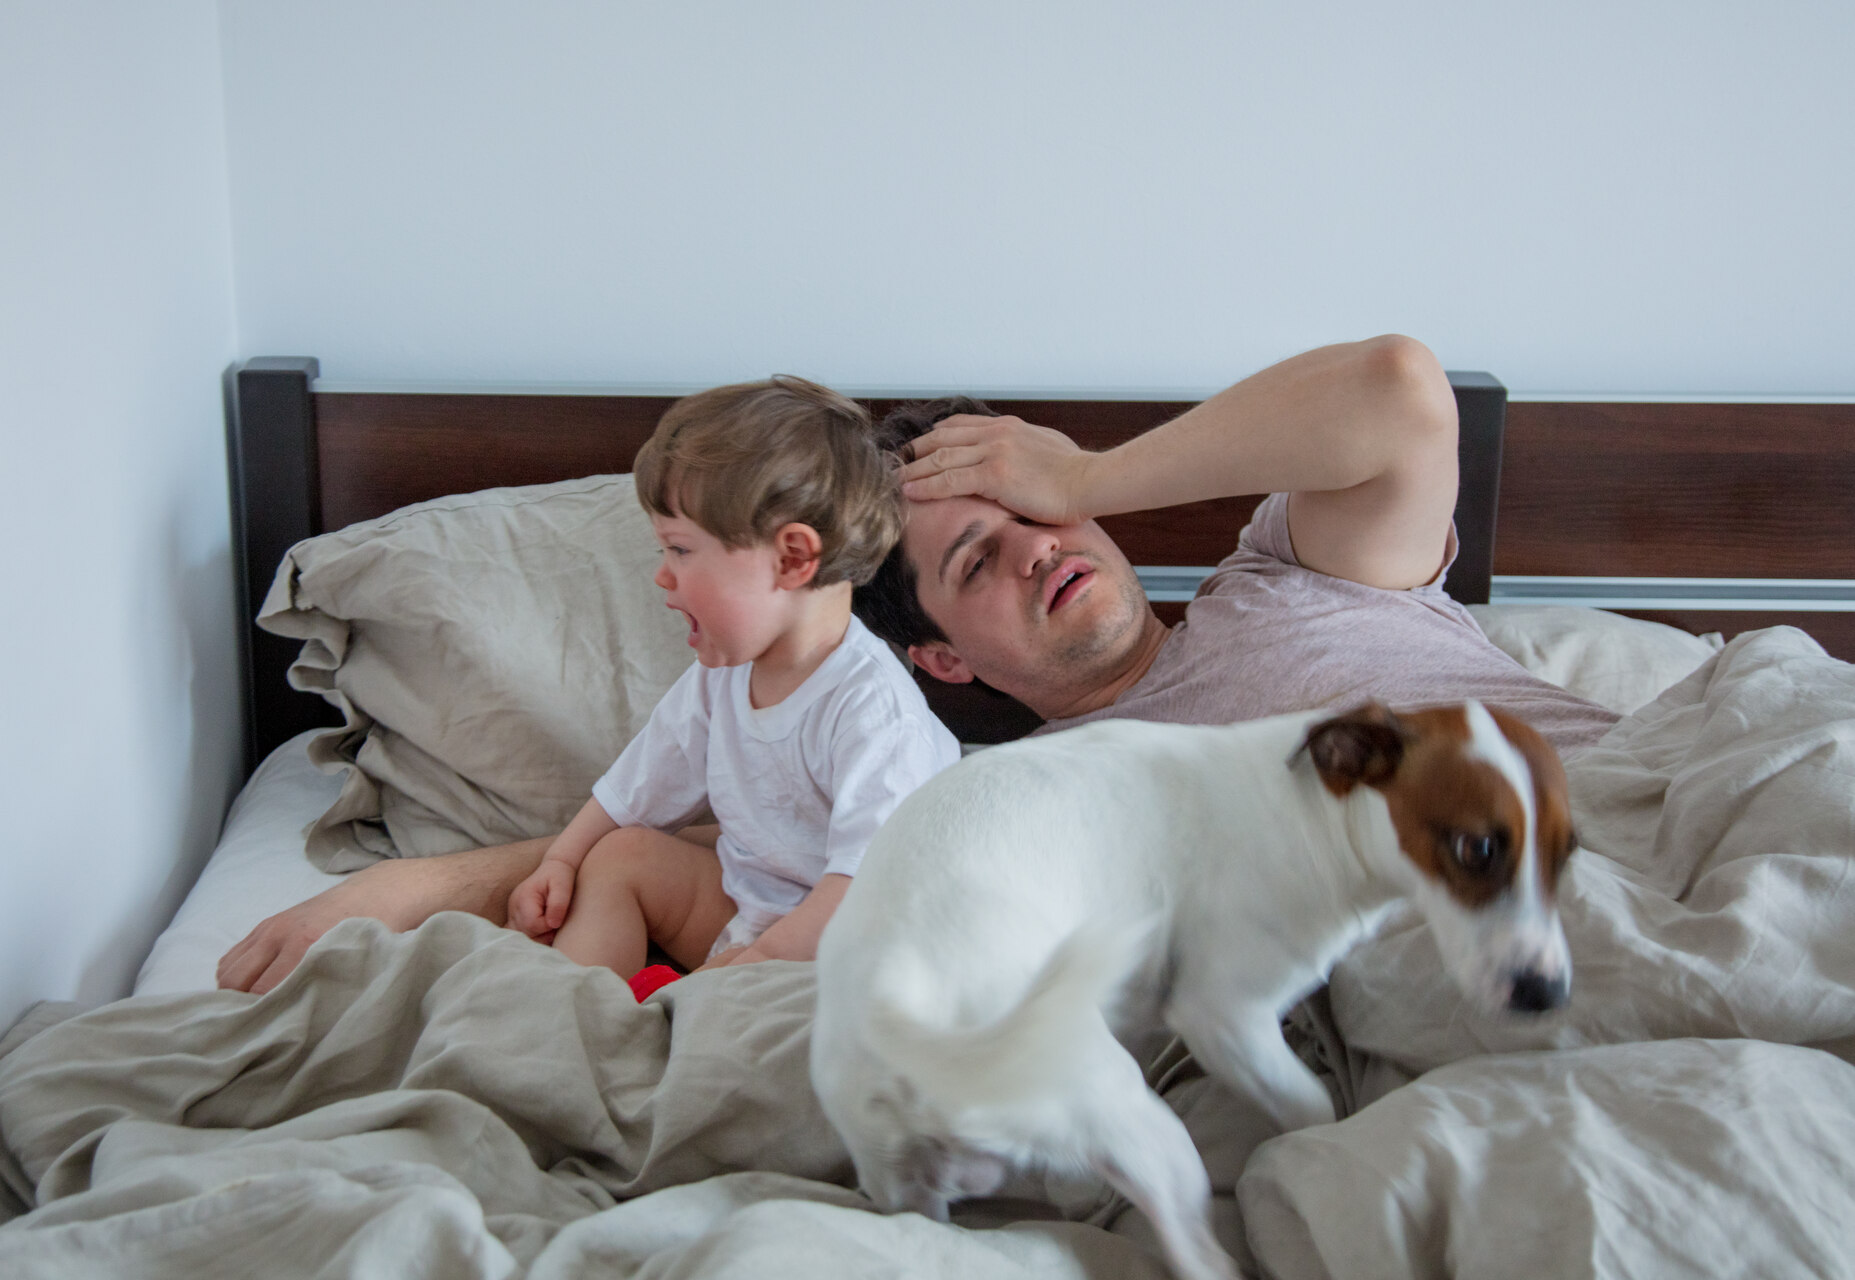 A crying toddler waking up a man and scaring a dog